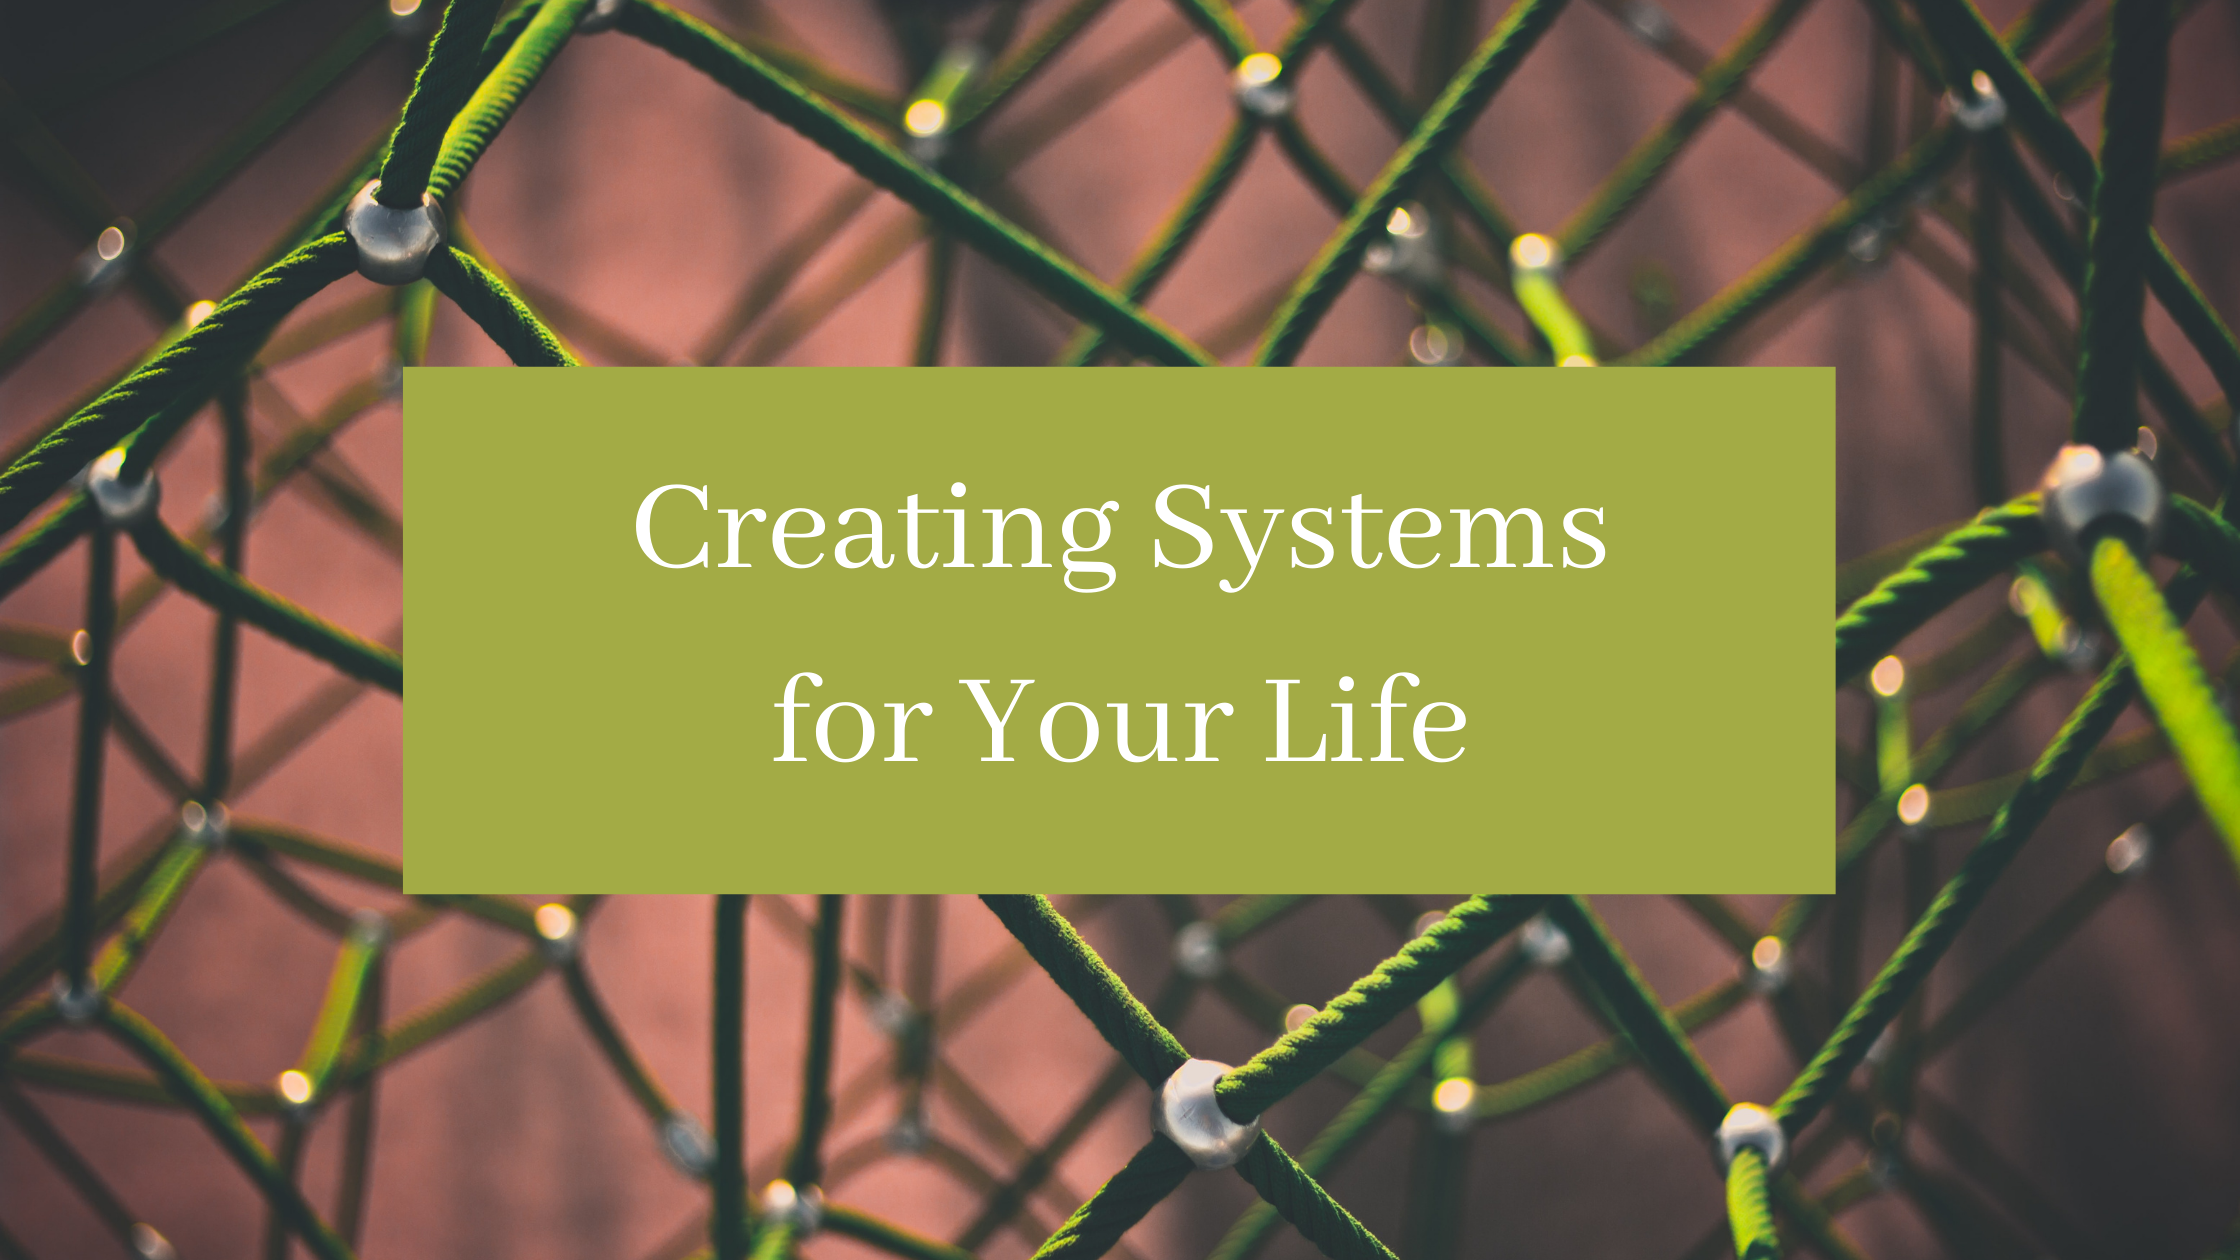 Creating Systems for Your Life